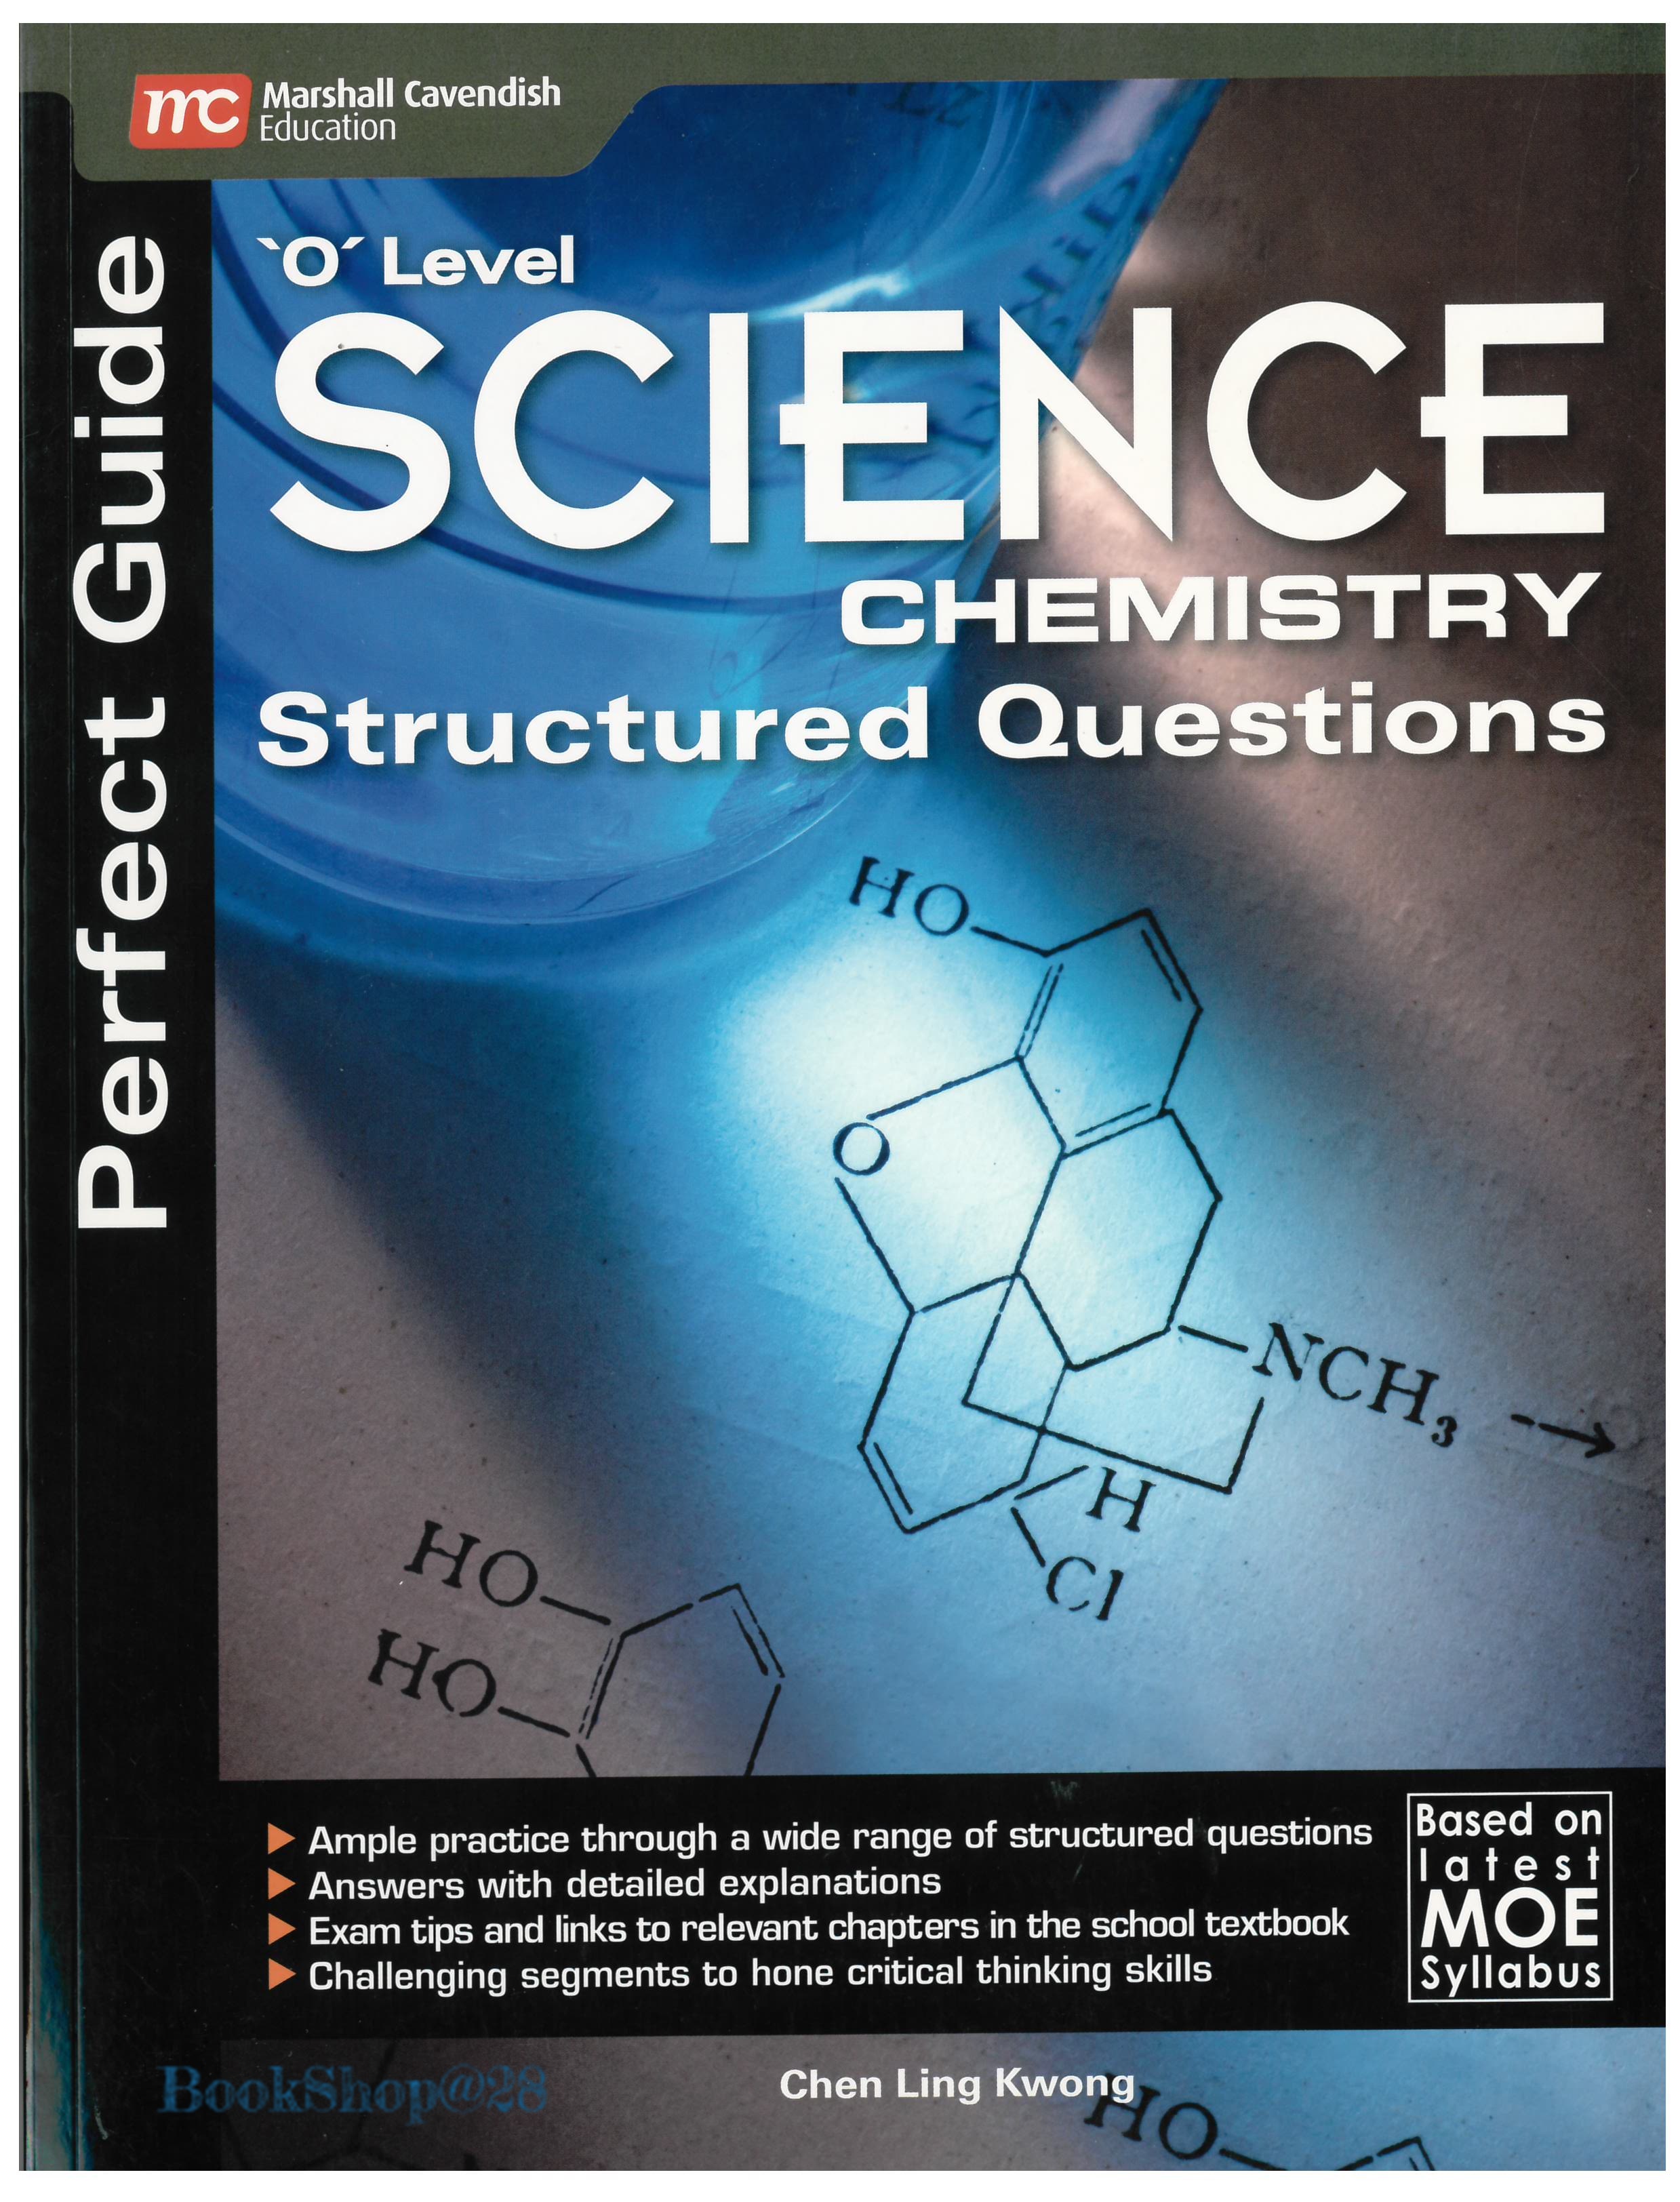 Perfect Guide 'O' Level Science Chemistry Structured Questions | แบบฝึกหัดพร้อมเฉลยวิชาเคมี (เนื้อหาภาษาอังกฤษ)